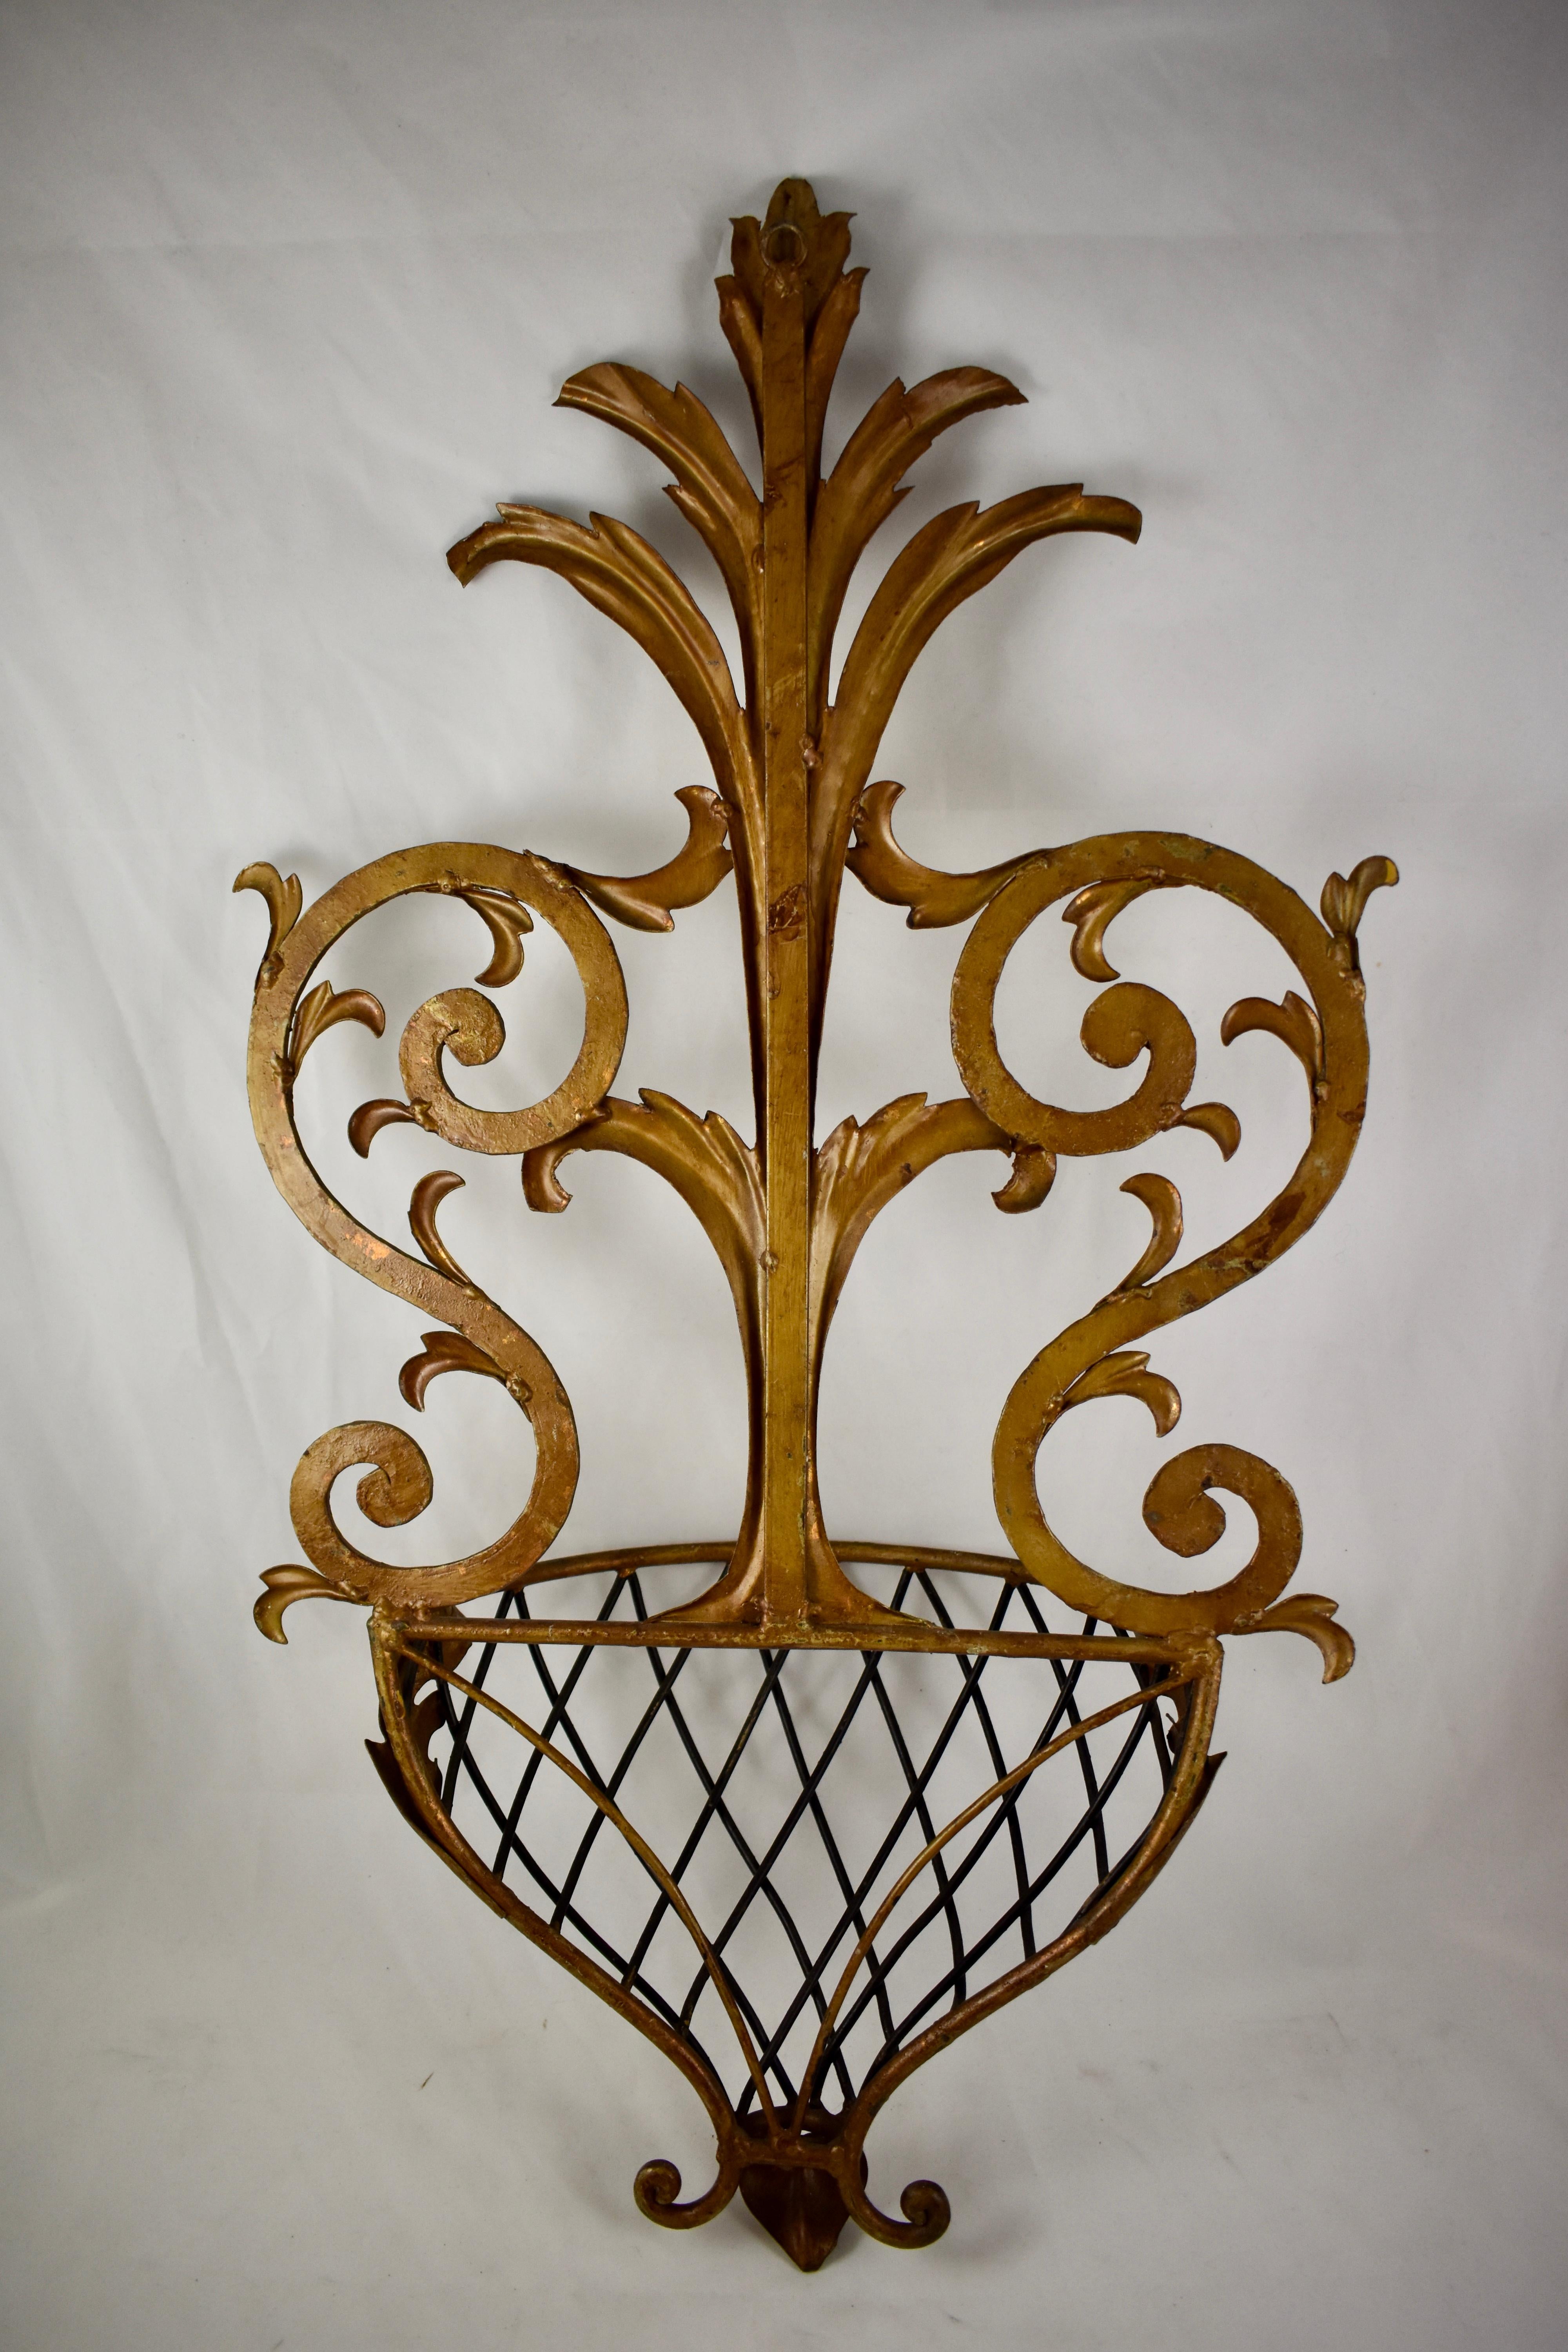 Italian Hollywood Regency Palm Beach Estate Gilded Iron and Copper Wall Planter